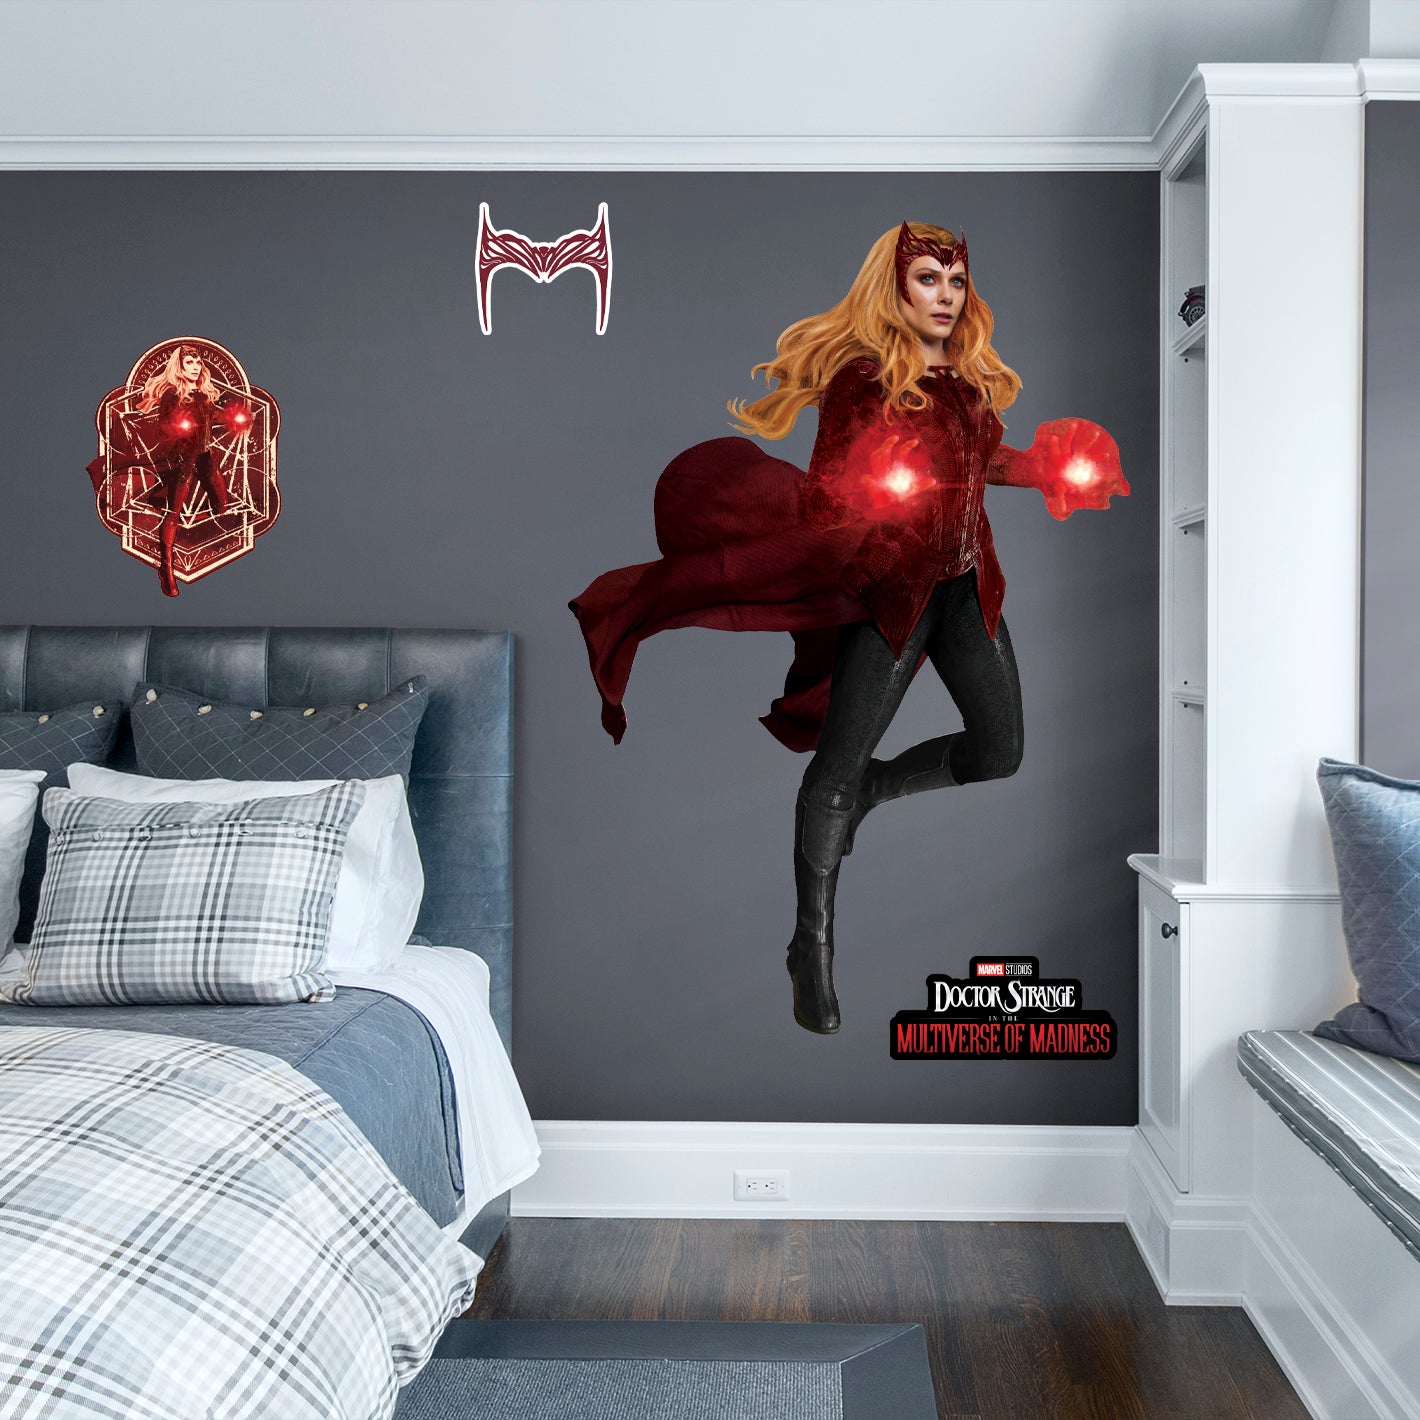 Doctor Strange 2: In the Multiverse of Madness: Scarlet Witch RealBig - Officially Licensed Marvel Removable Adhesive Decal